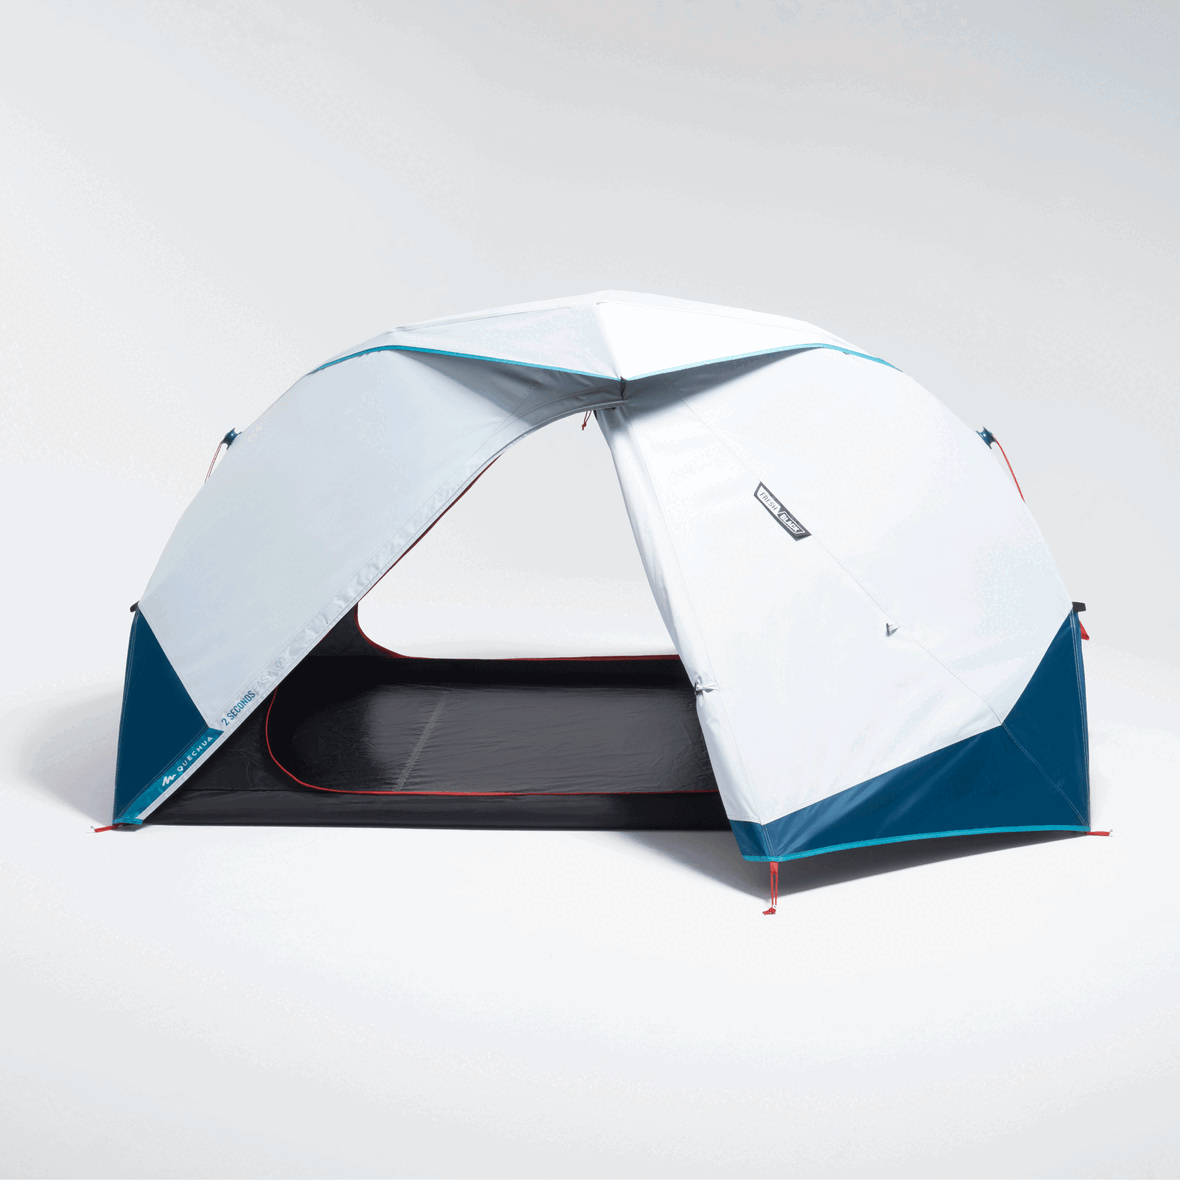 FAMILY POLE TENT - ARPENAZ 8.4 XL - 8 PERSONS | 2018